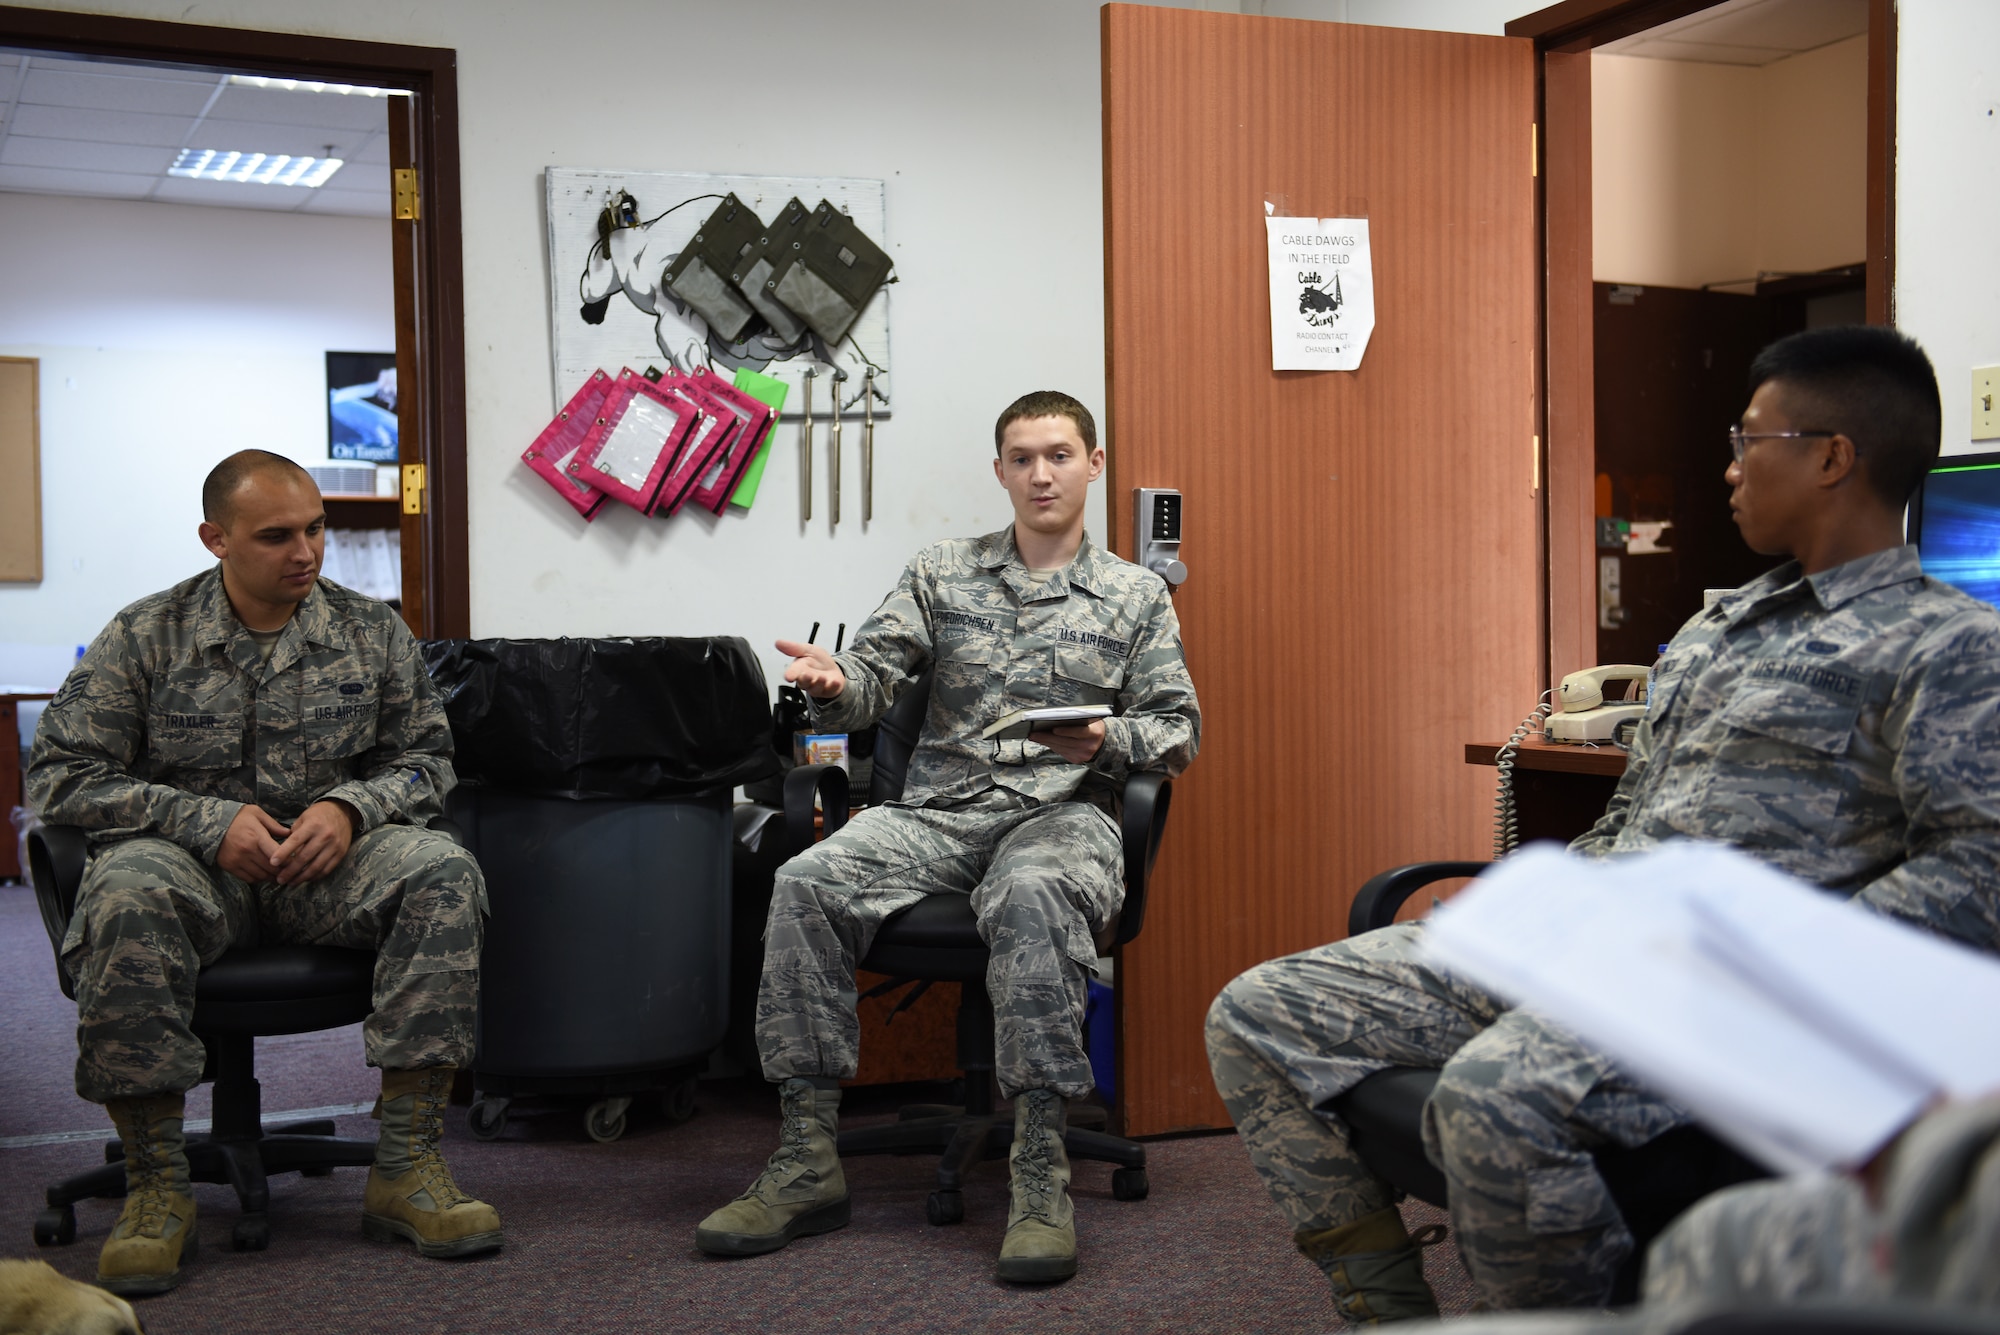 Members of the communication squadron brief each other on workplace safety